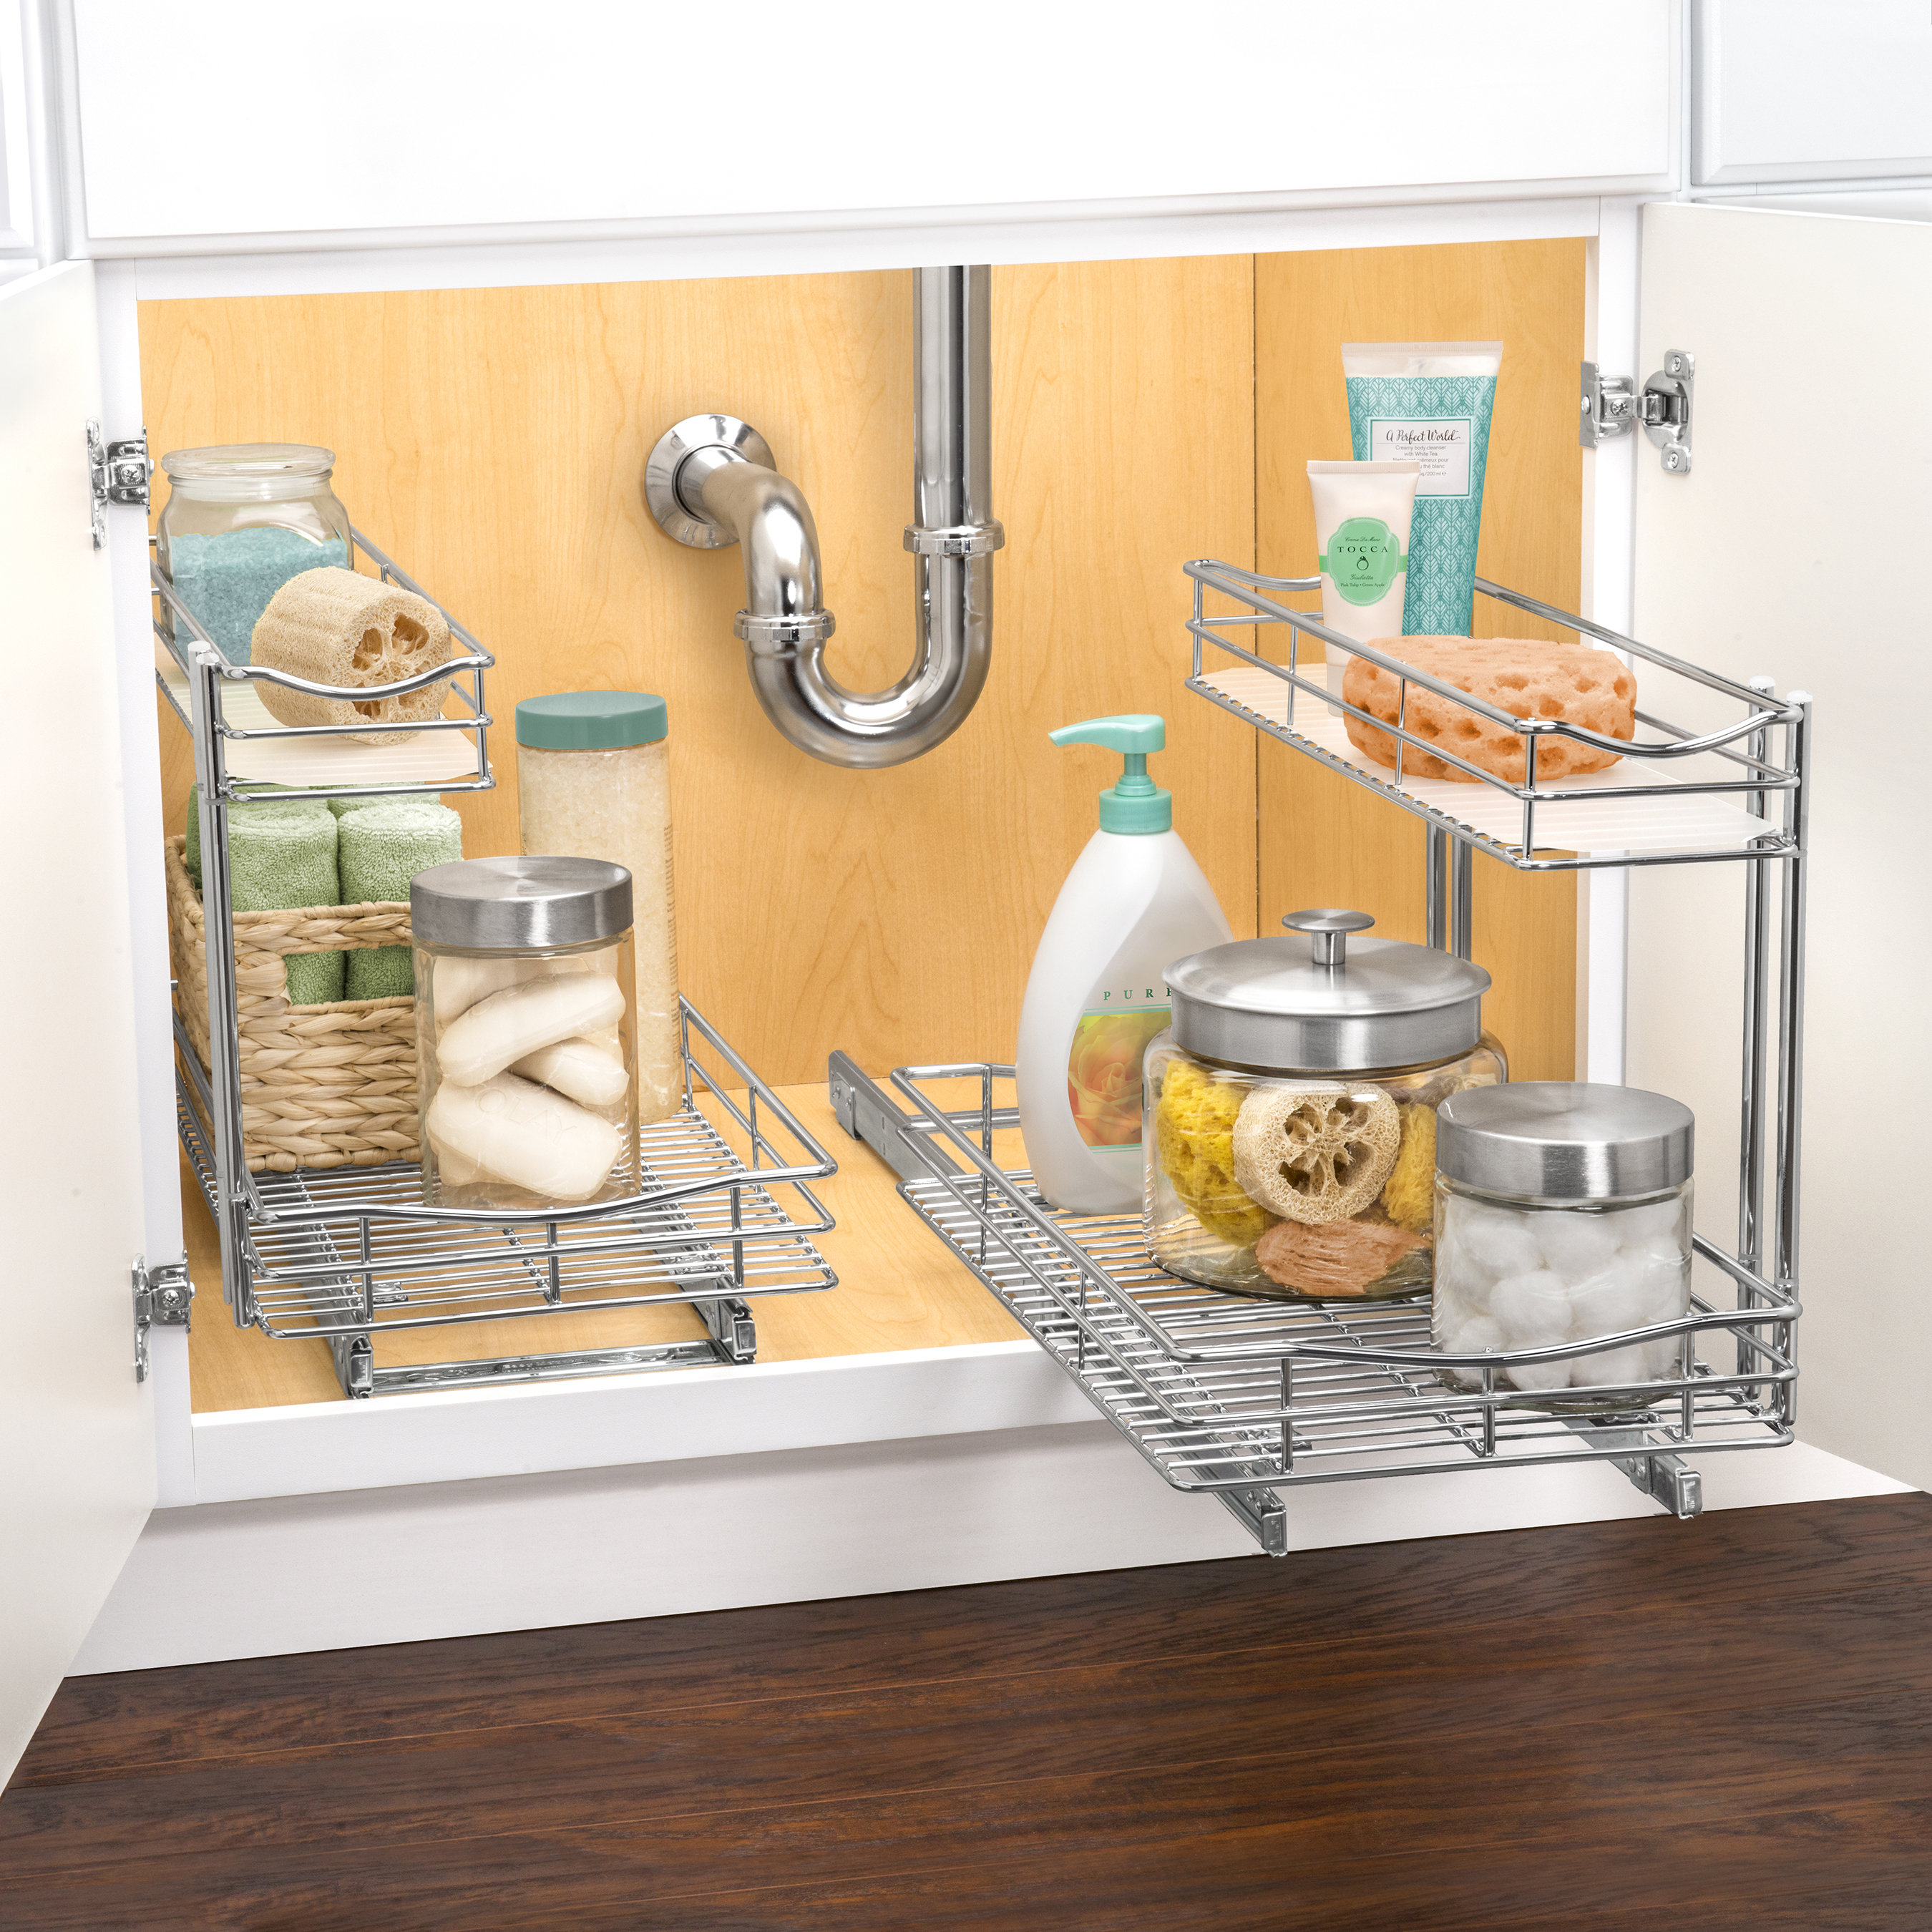 Lynk%25C2%25AE Roll Out Under Sink Cabinet Organizer Pull Out Two Tier Sliding Shelf 11.5 In. Wide X 21 Inch Deep Chrome 